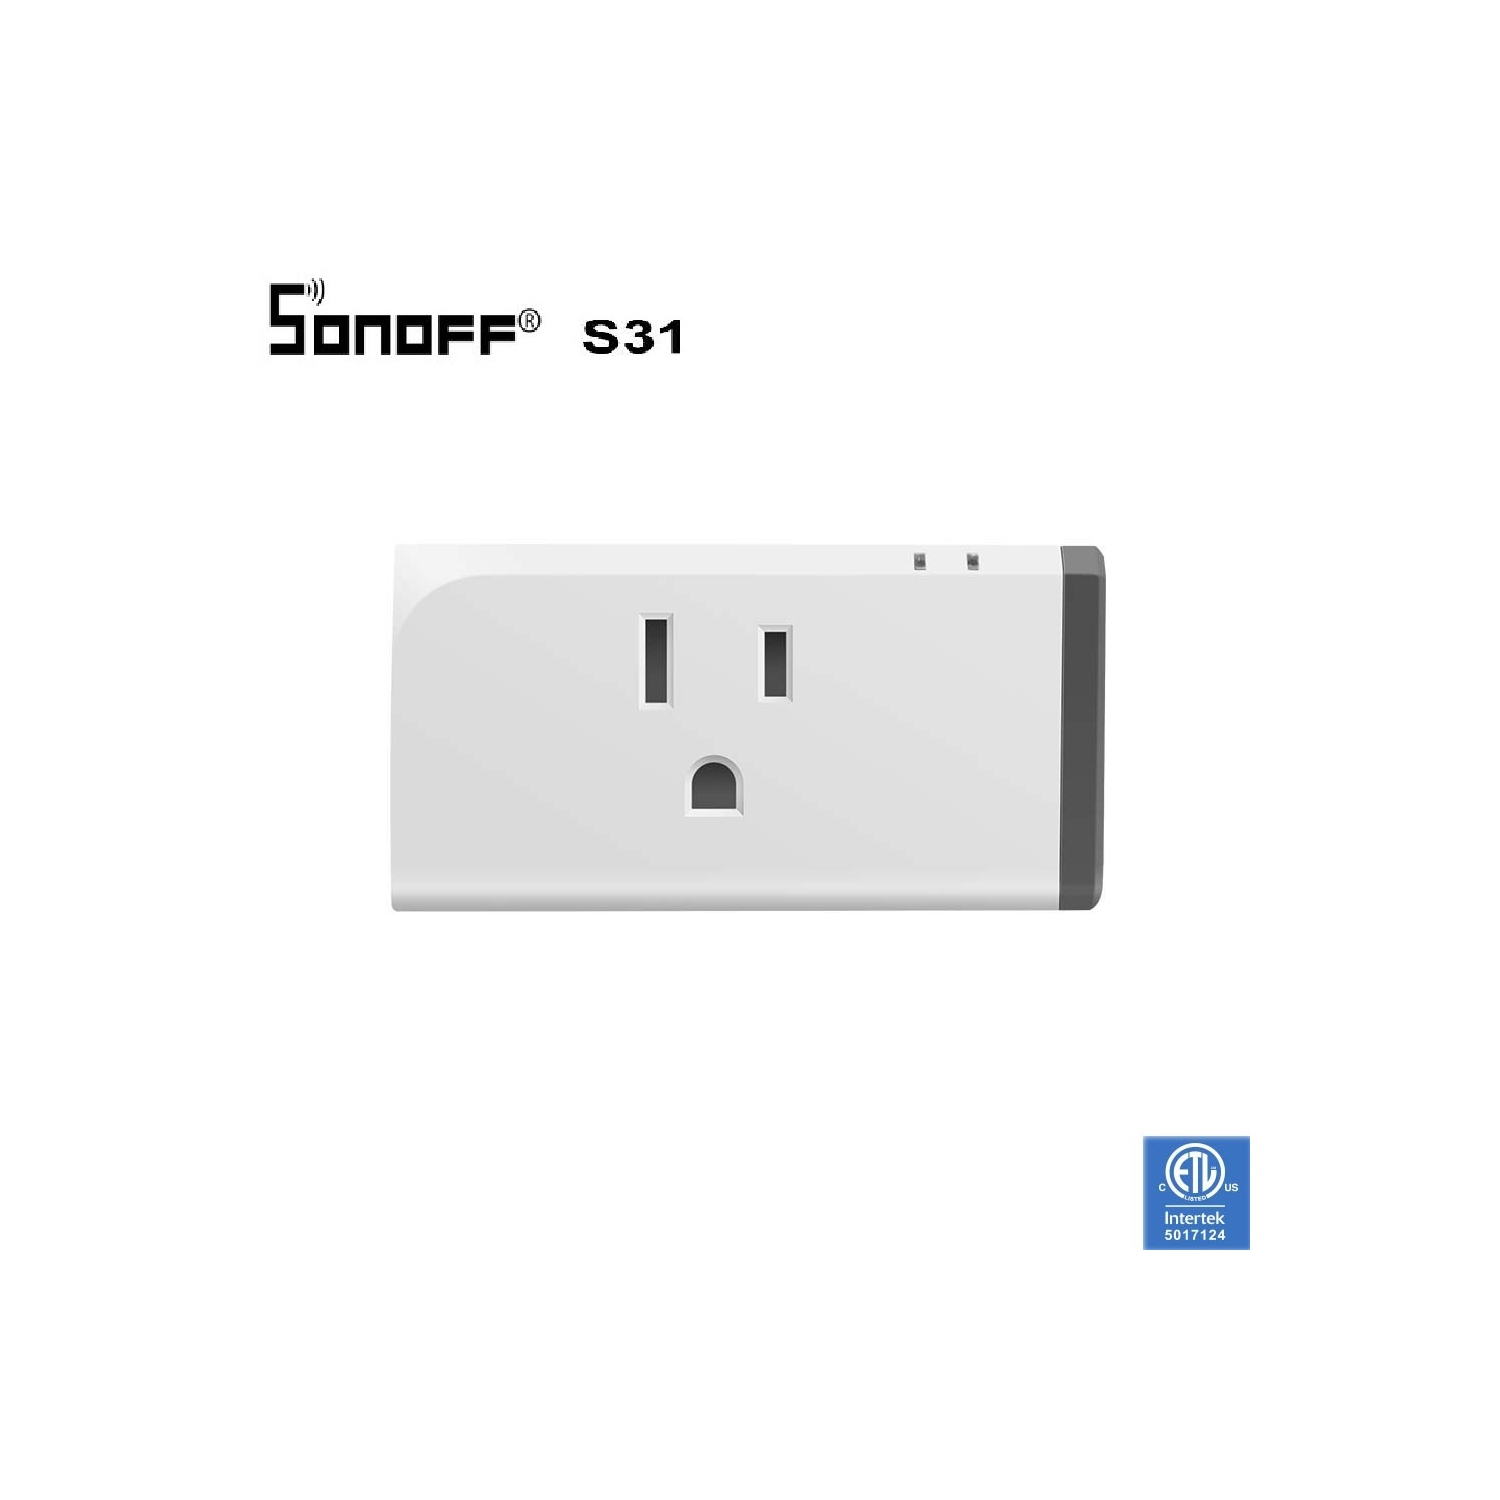 Sonoff S31 Smart WiFi Socket Remote Control Switch Outlet